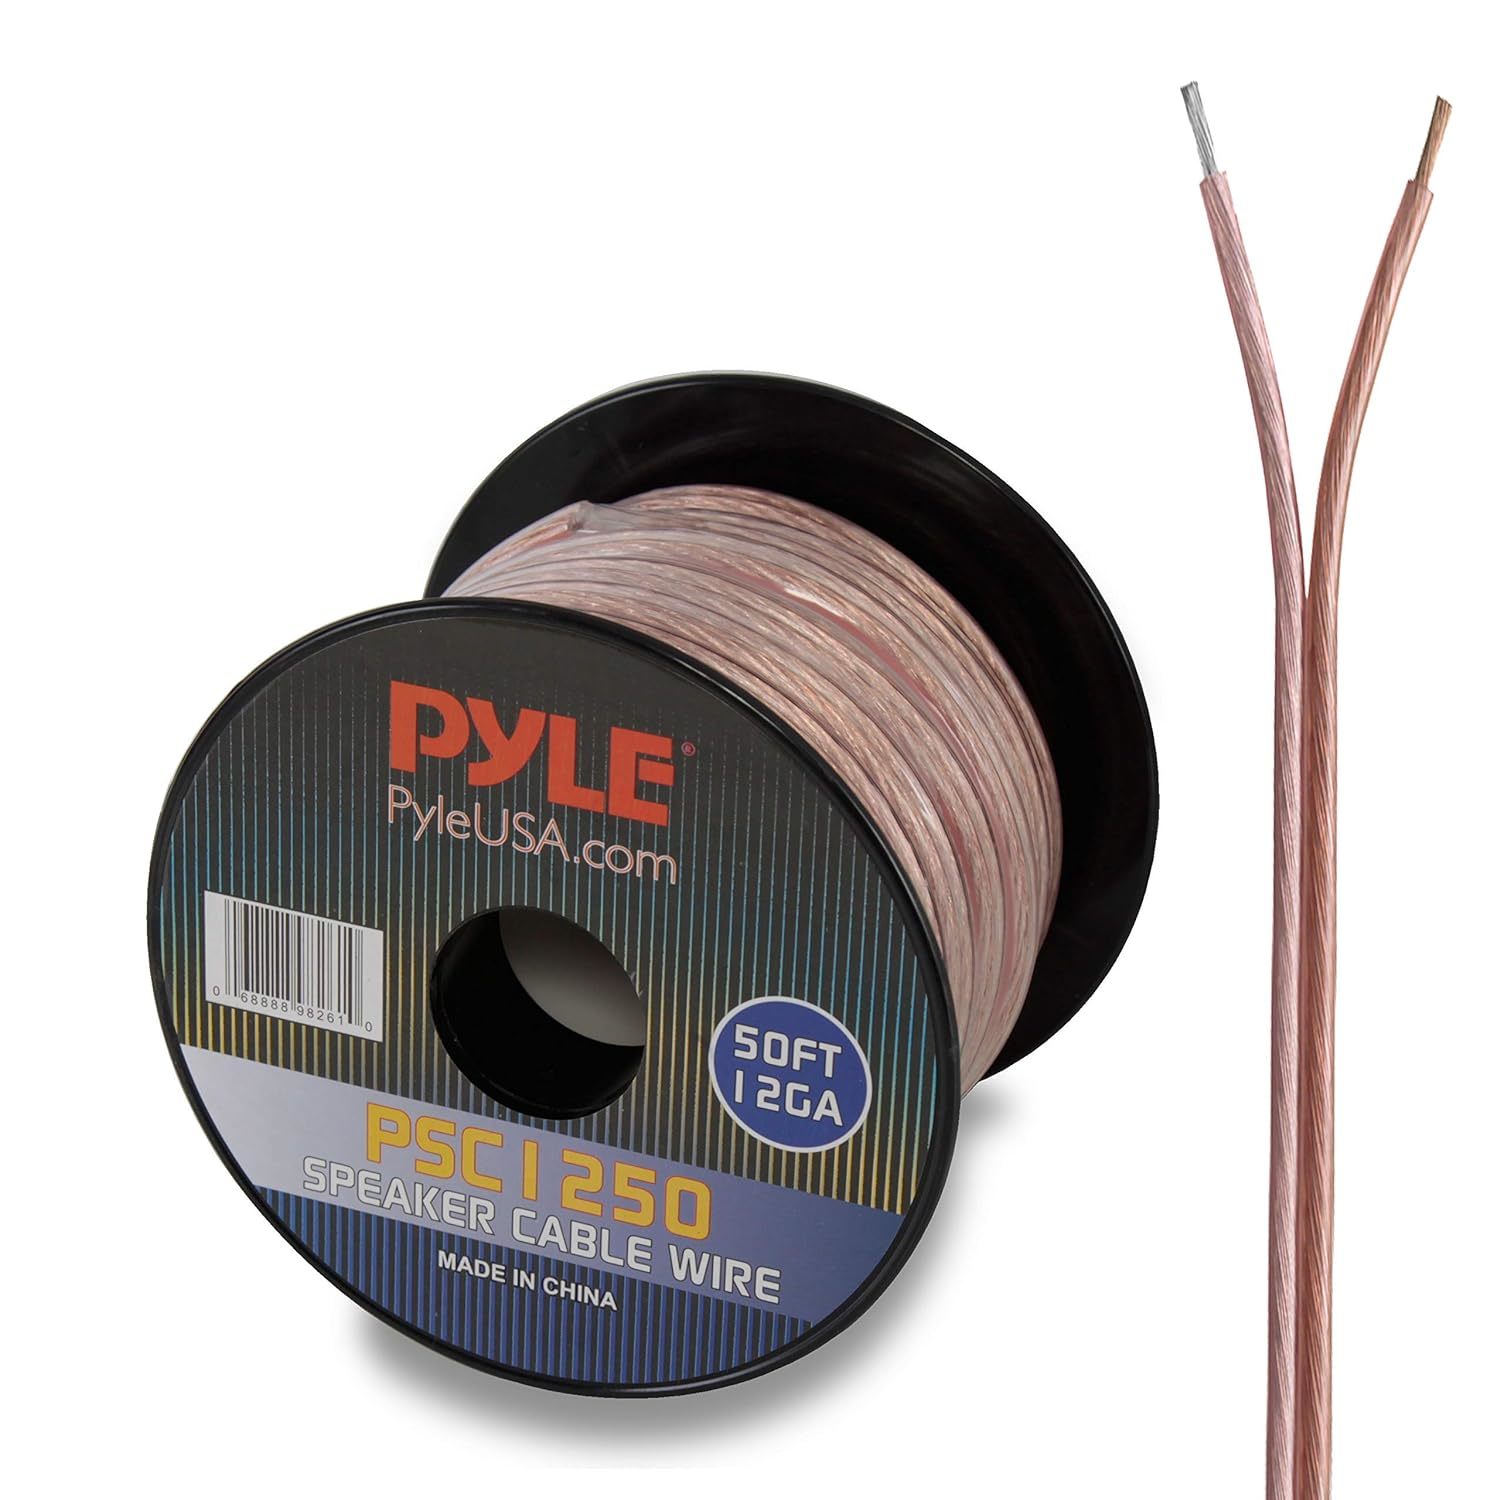 12　similar　Pyle　50ft　Speaker　Gauge　50　Wire　Copper　and　items